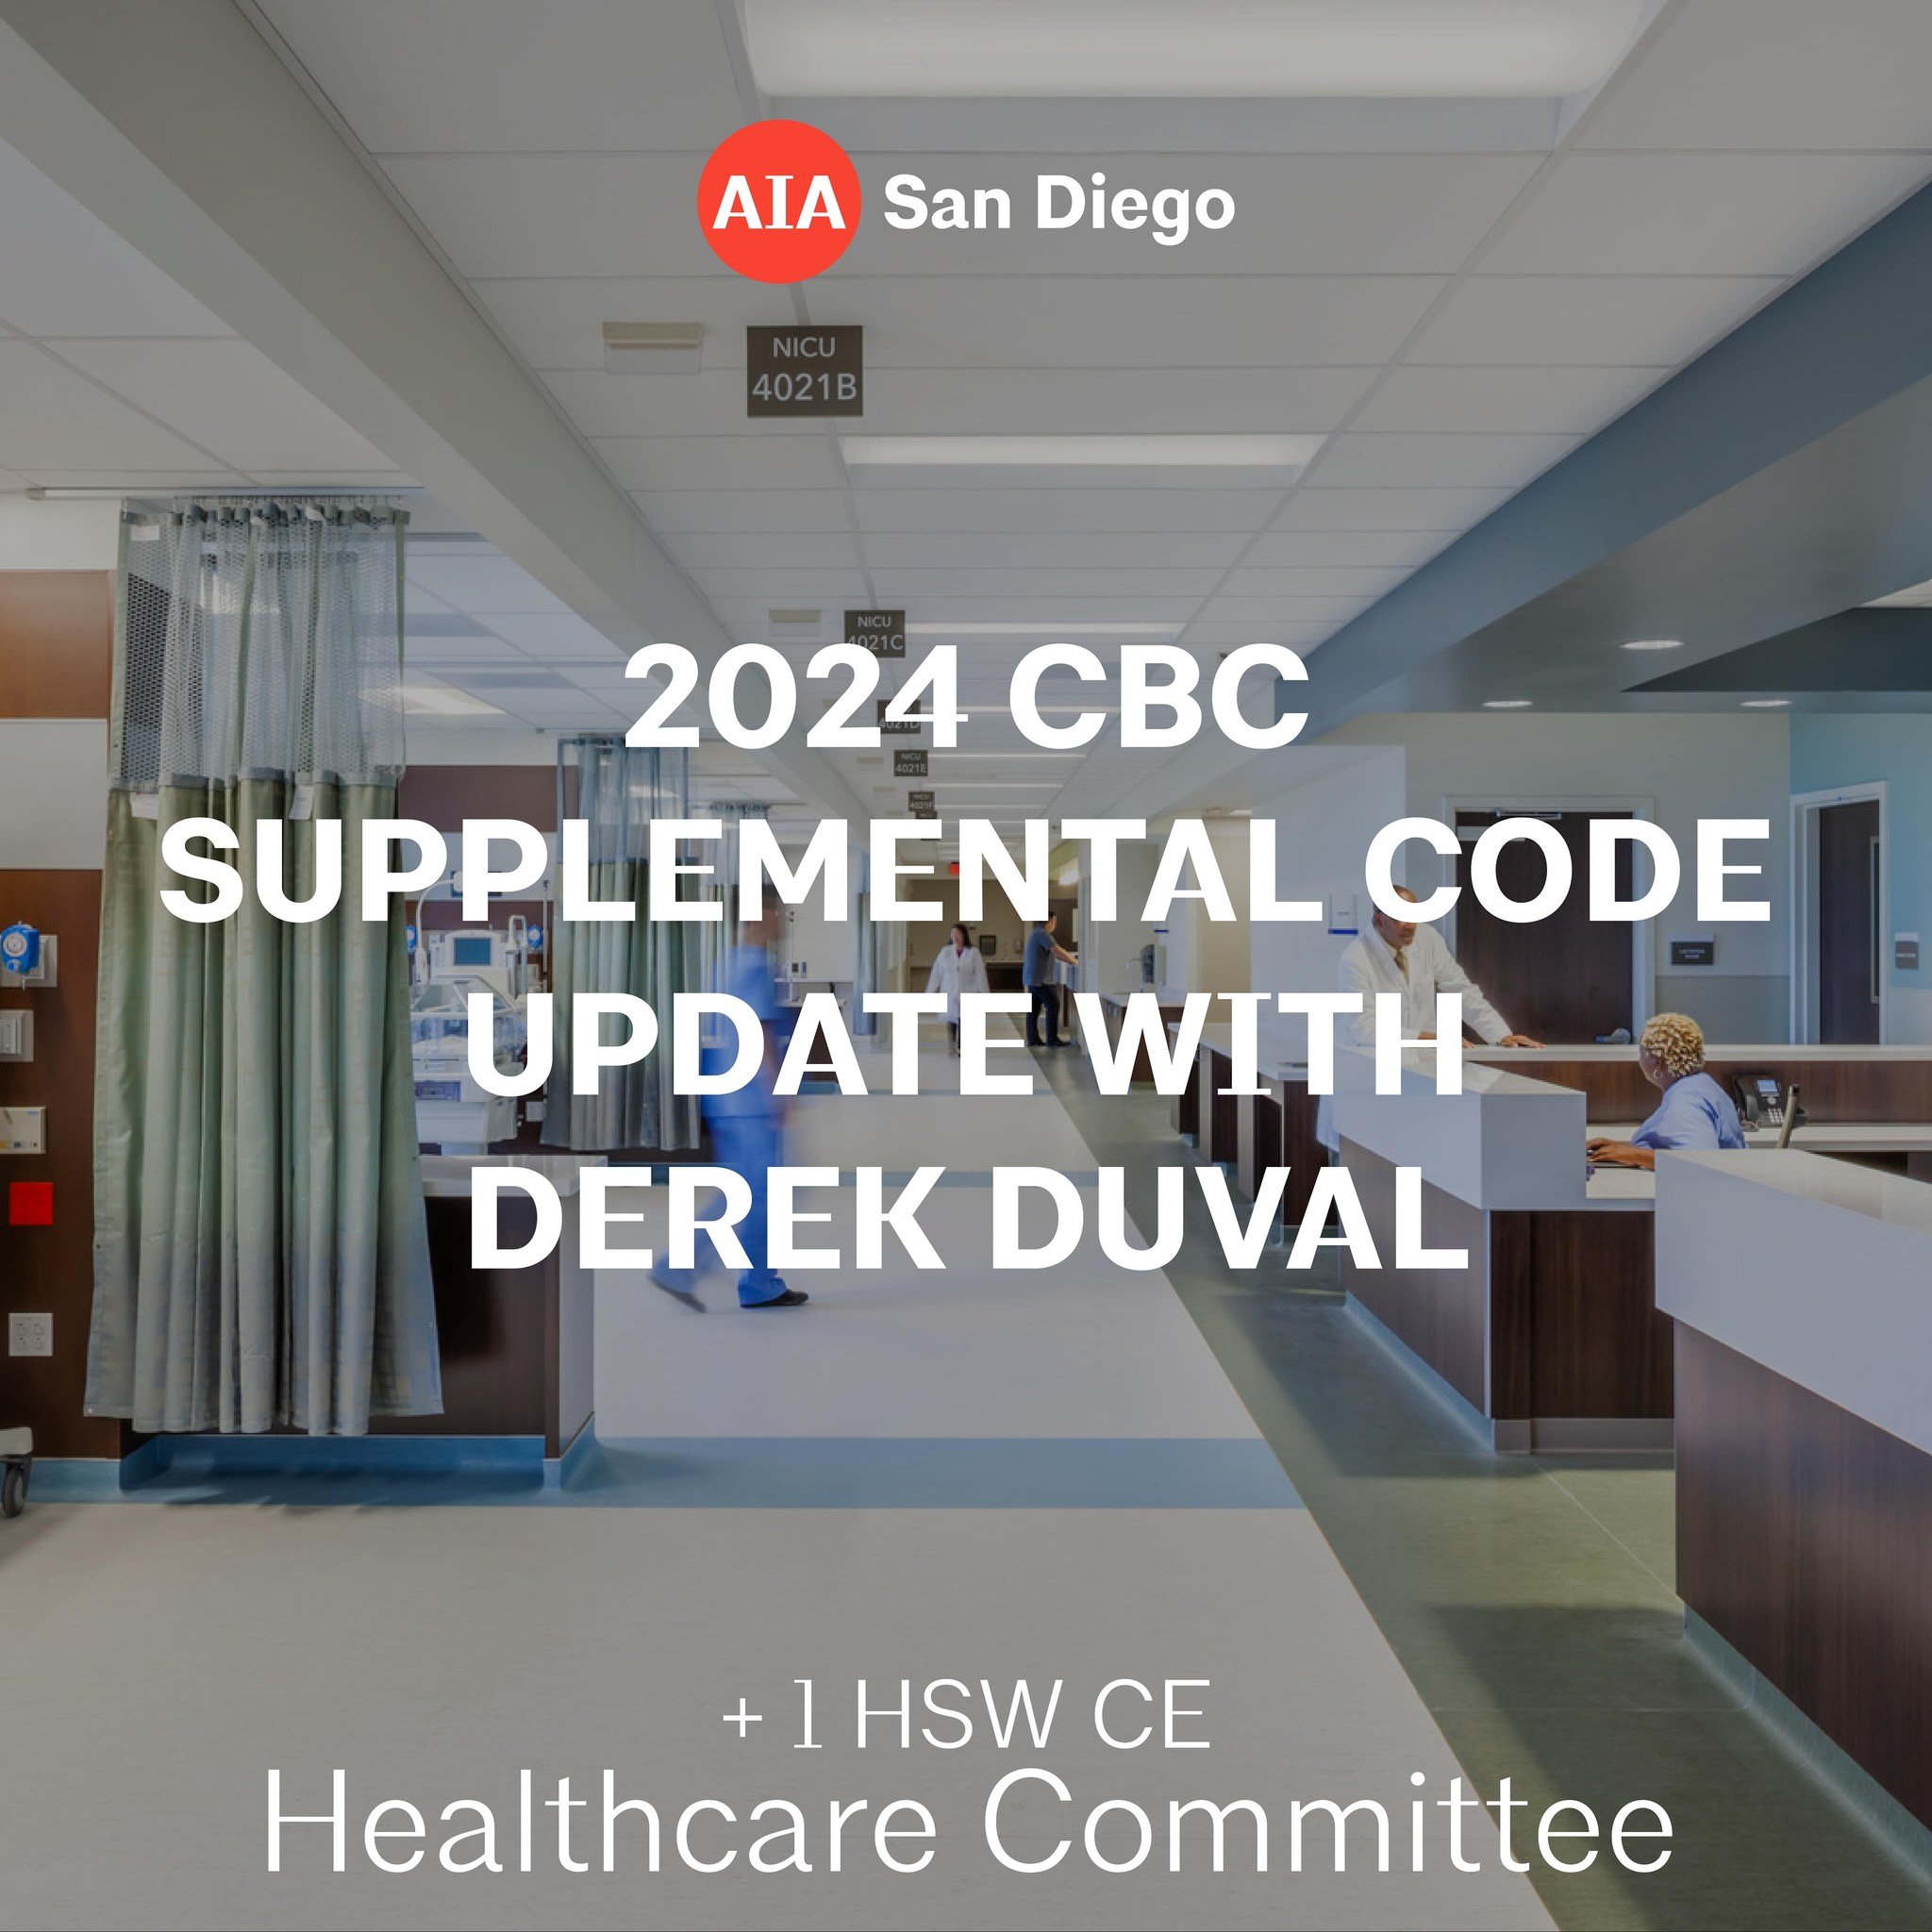 APRIL 23 at 4:30 PM! The Healthcare Committee has designed a panel presentation on applying the 2024 California Building Code (CBC) Supplemental and how it will affect your healthcare project and Fire, Life, Safety Planning. 

Earn 1 HSW CE for atten